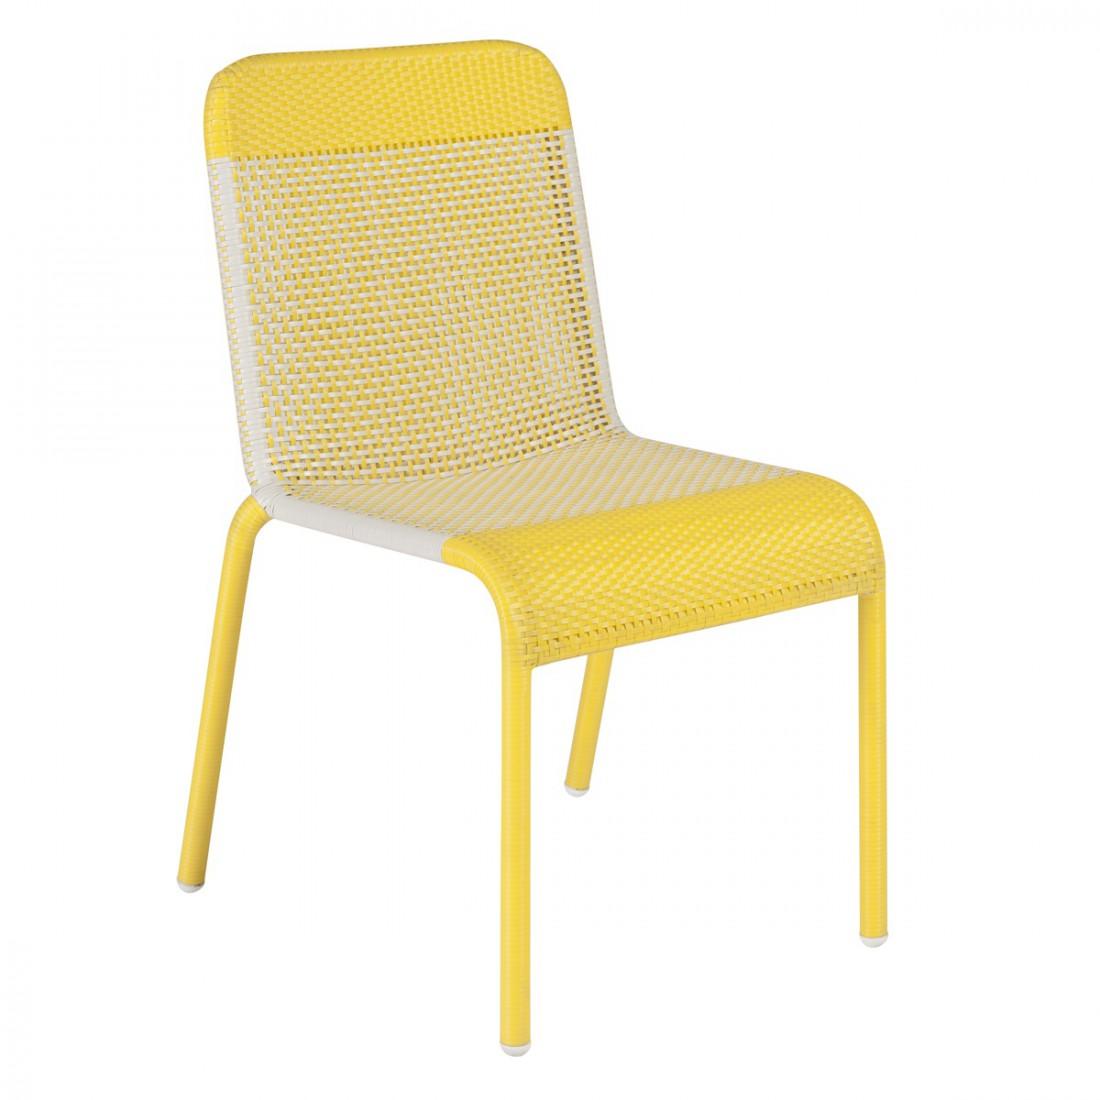 yellow stackable chairs